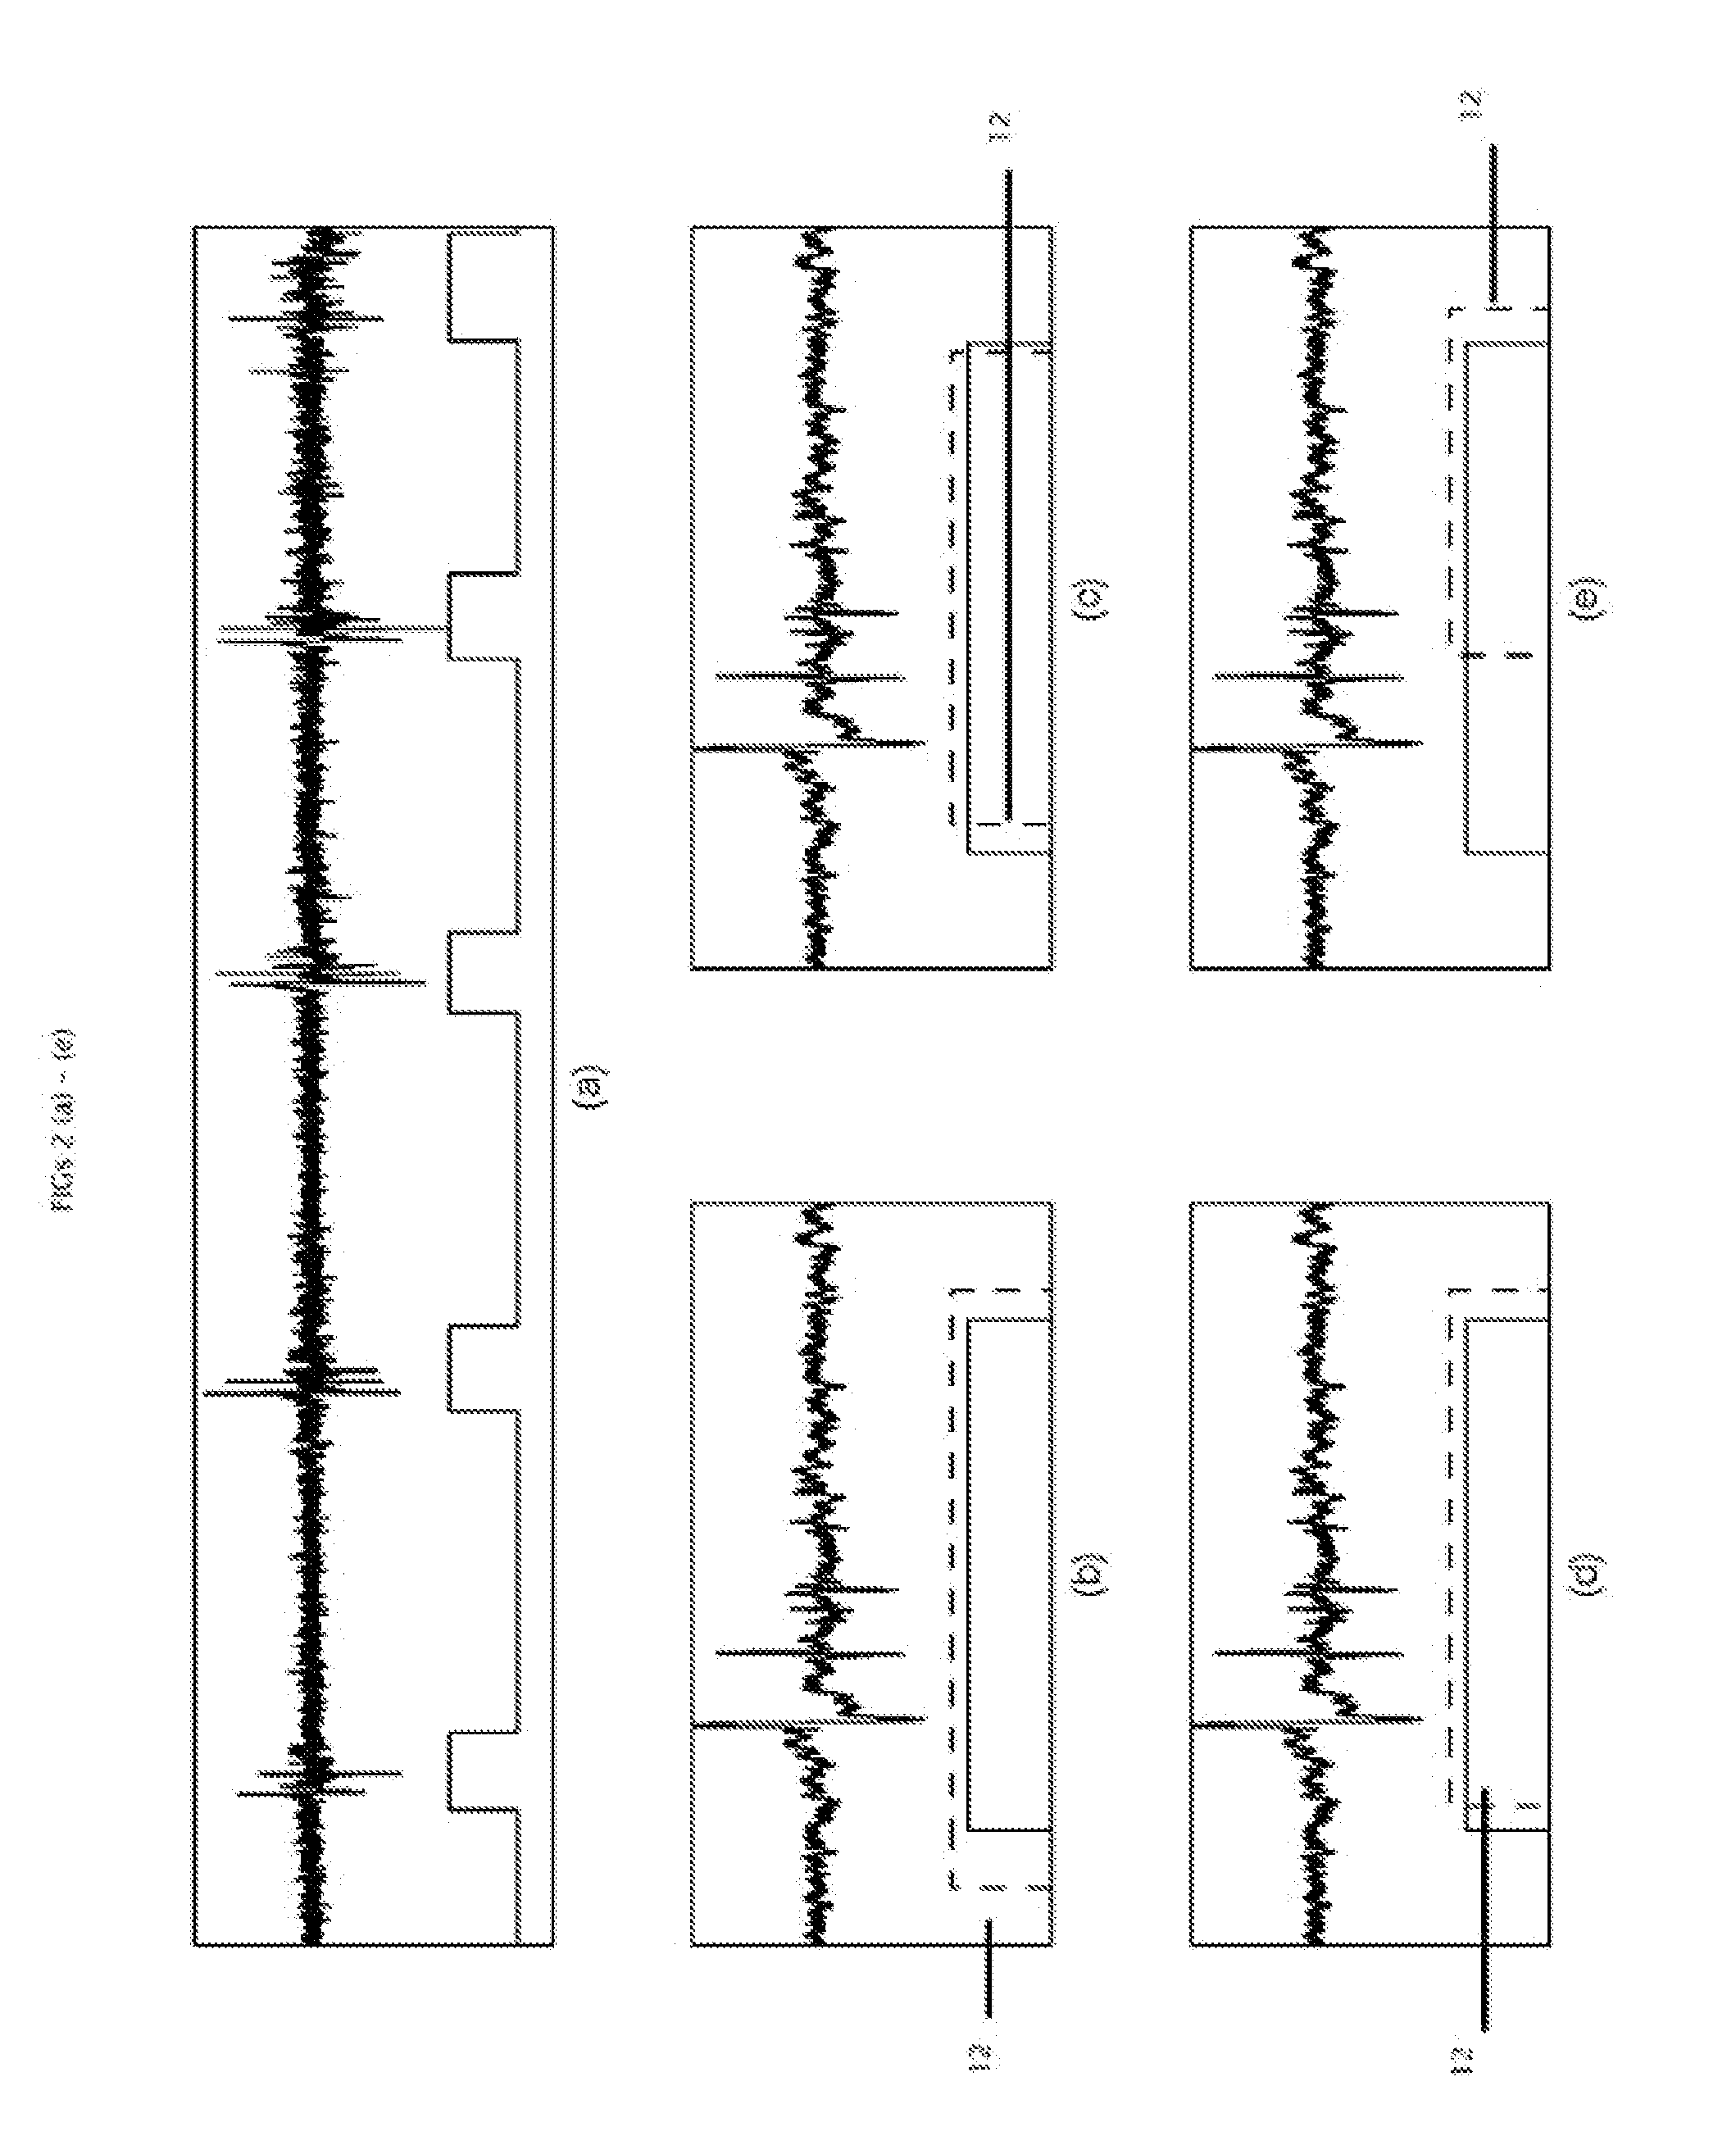 Method and system of segmentation and time duration analysis of dual-axis swallowing accelerometry signals